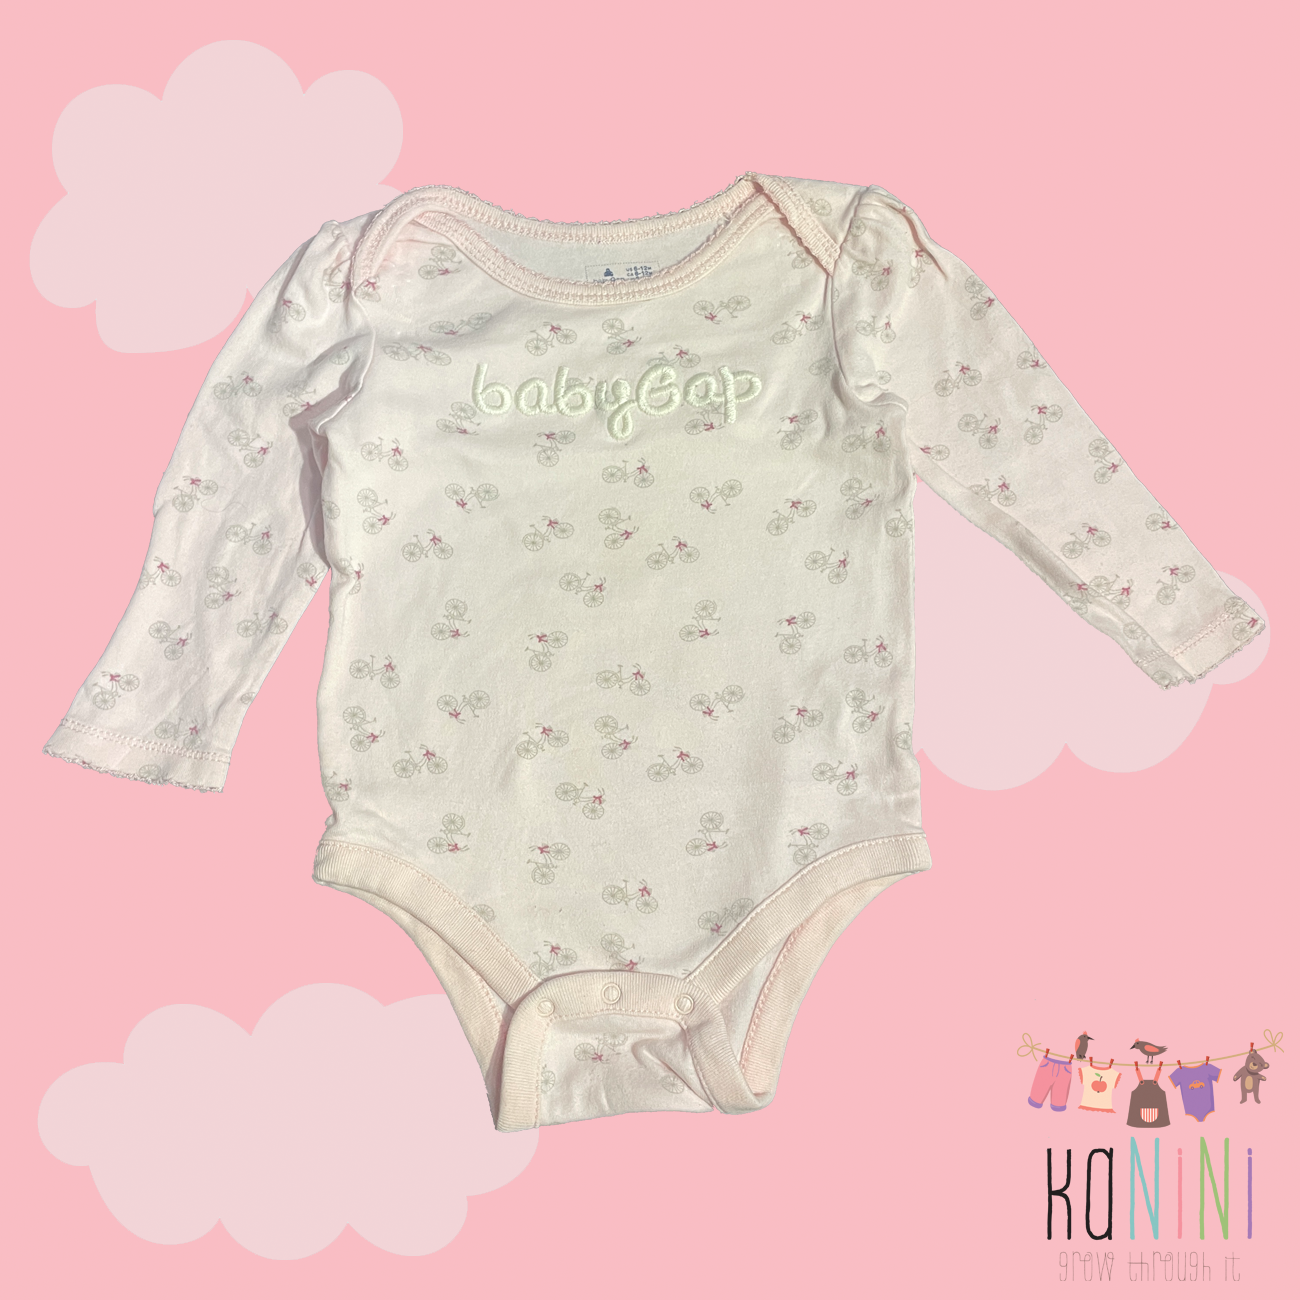 Featured image for “Baby GAP 6 - 12 Months Girls Long Sleeve Romper”